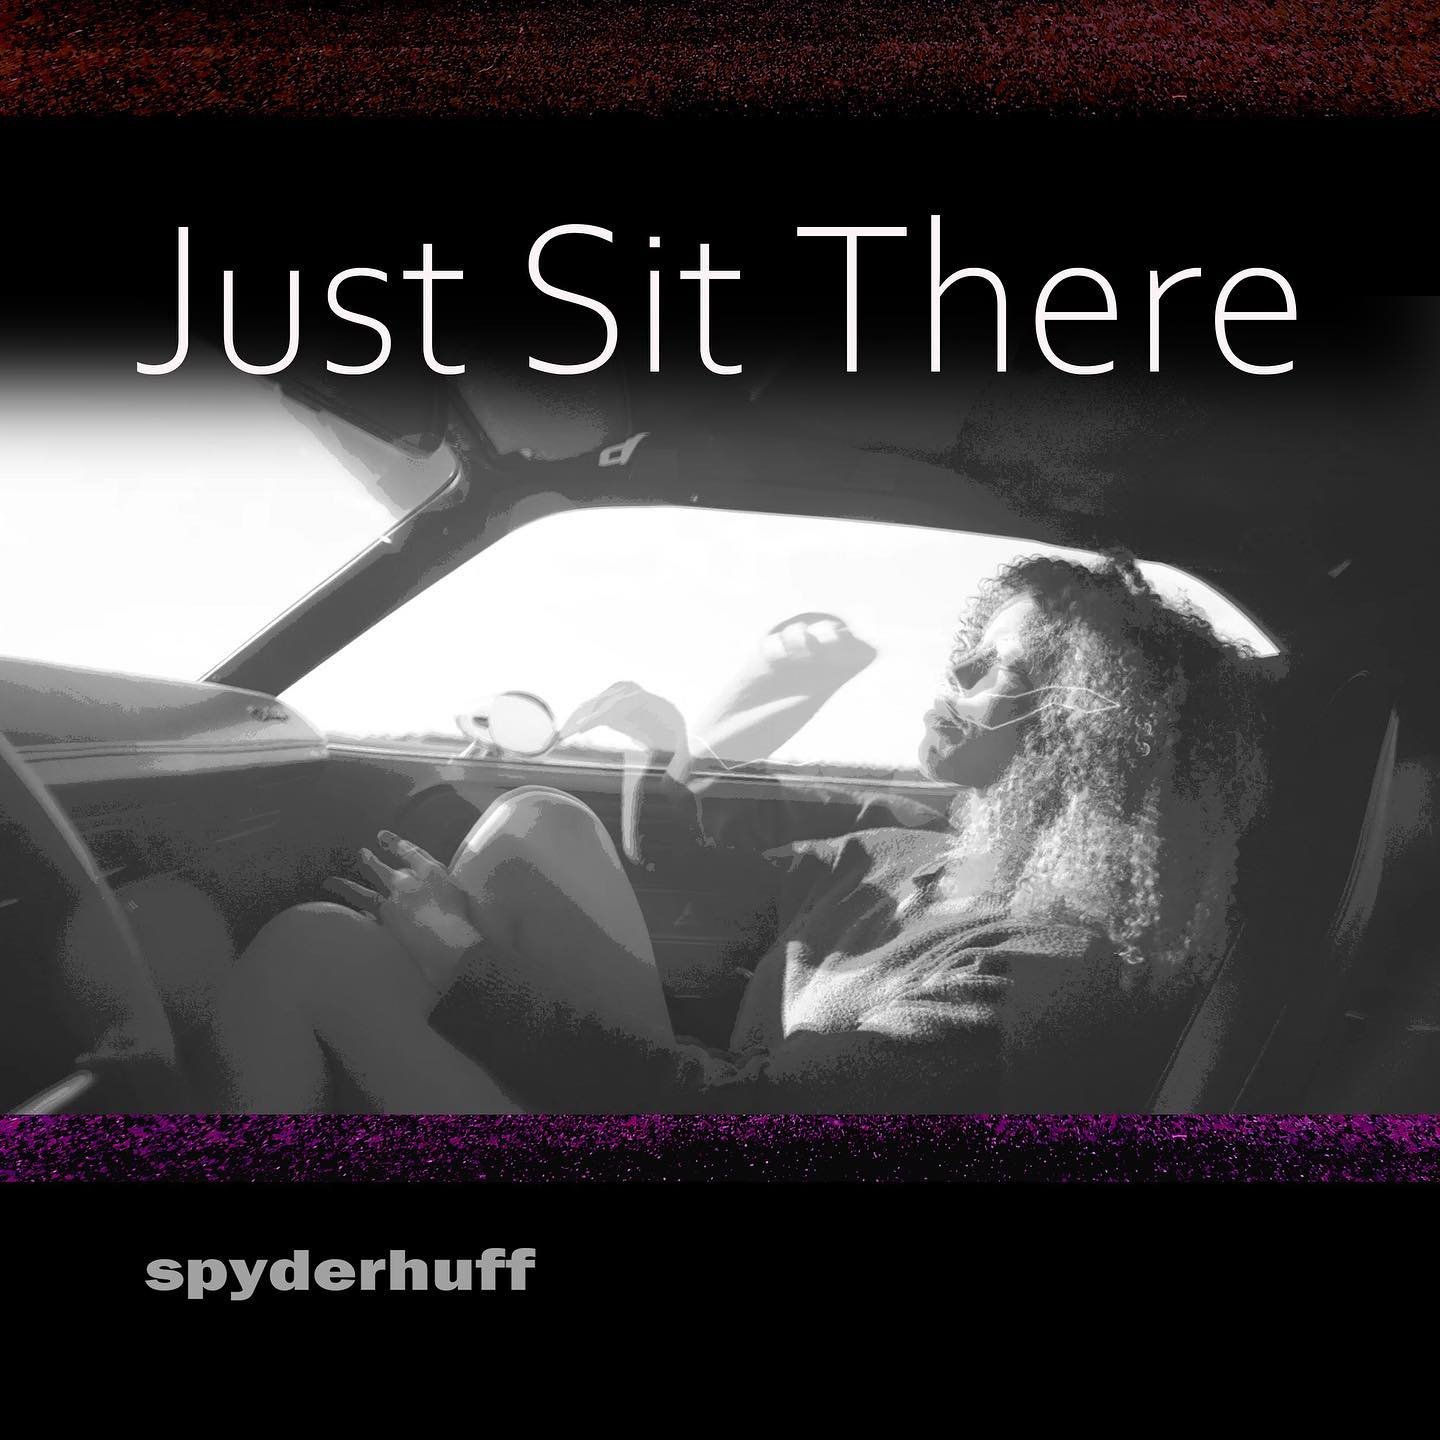 &lsquo;JUST SIT THERE&rsquo; by Spyderhuff - A Detroit Band&rsquo;s Take On Roadtrip Blues

Detroit based, psychedelic blues-rock band, Spyderhuff, combines a swampy jam band instrumental with a vocal sample of all-too-familiar sentiment. &ldquo;If y